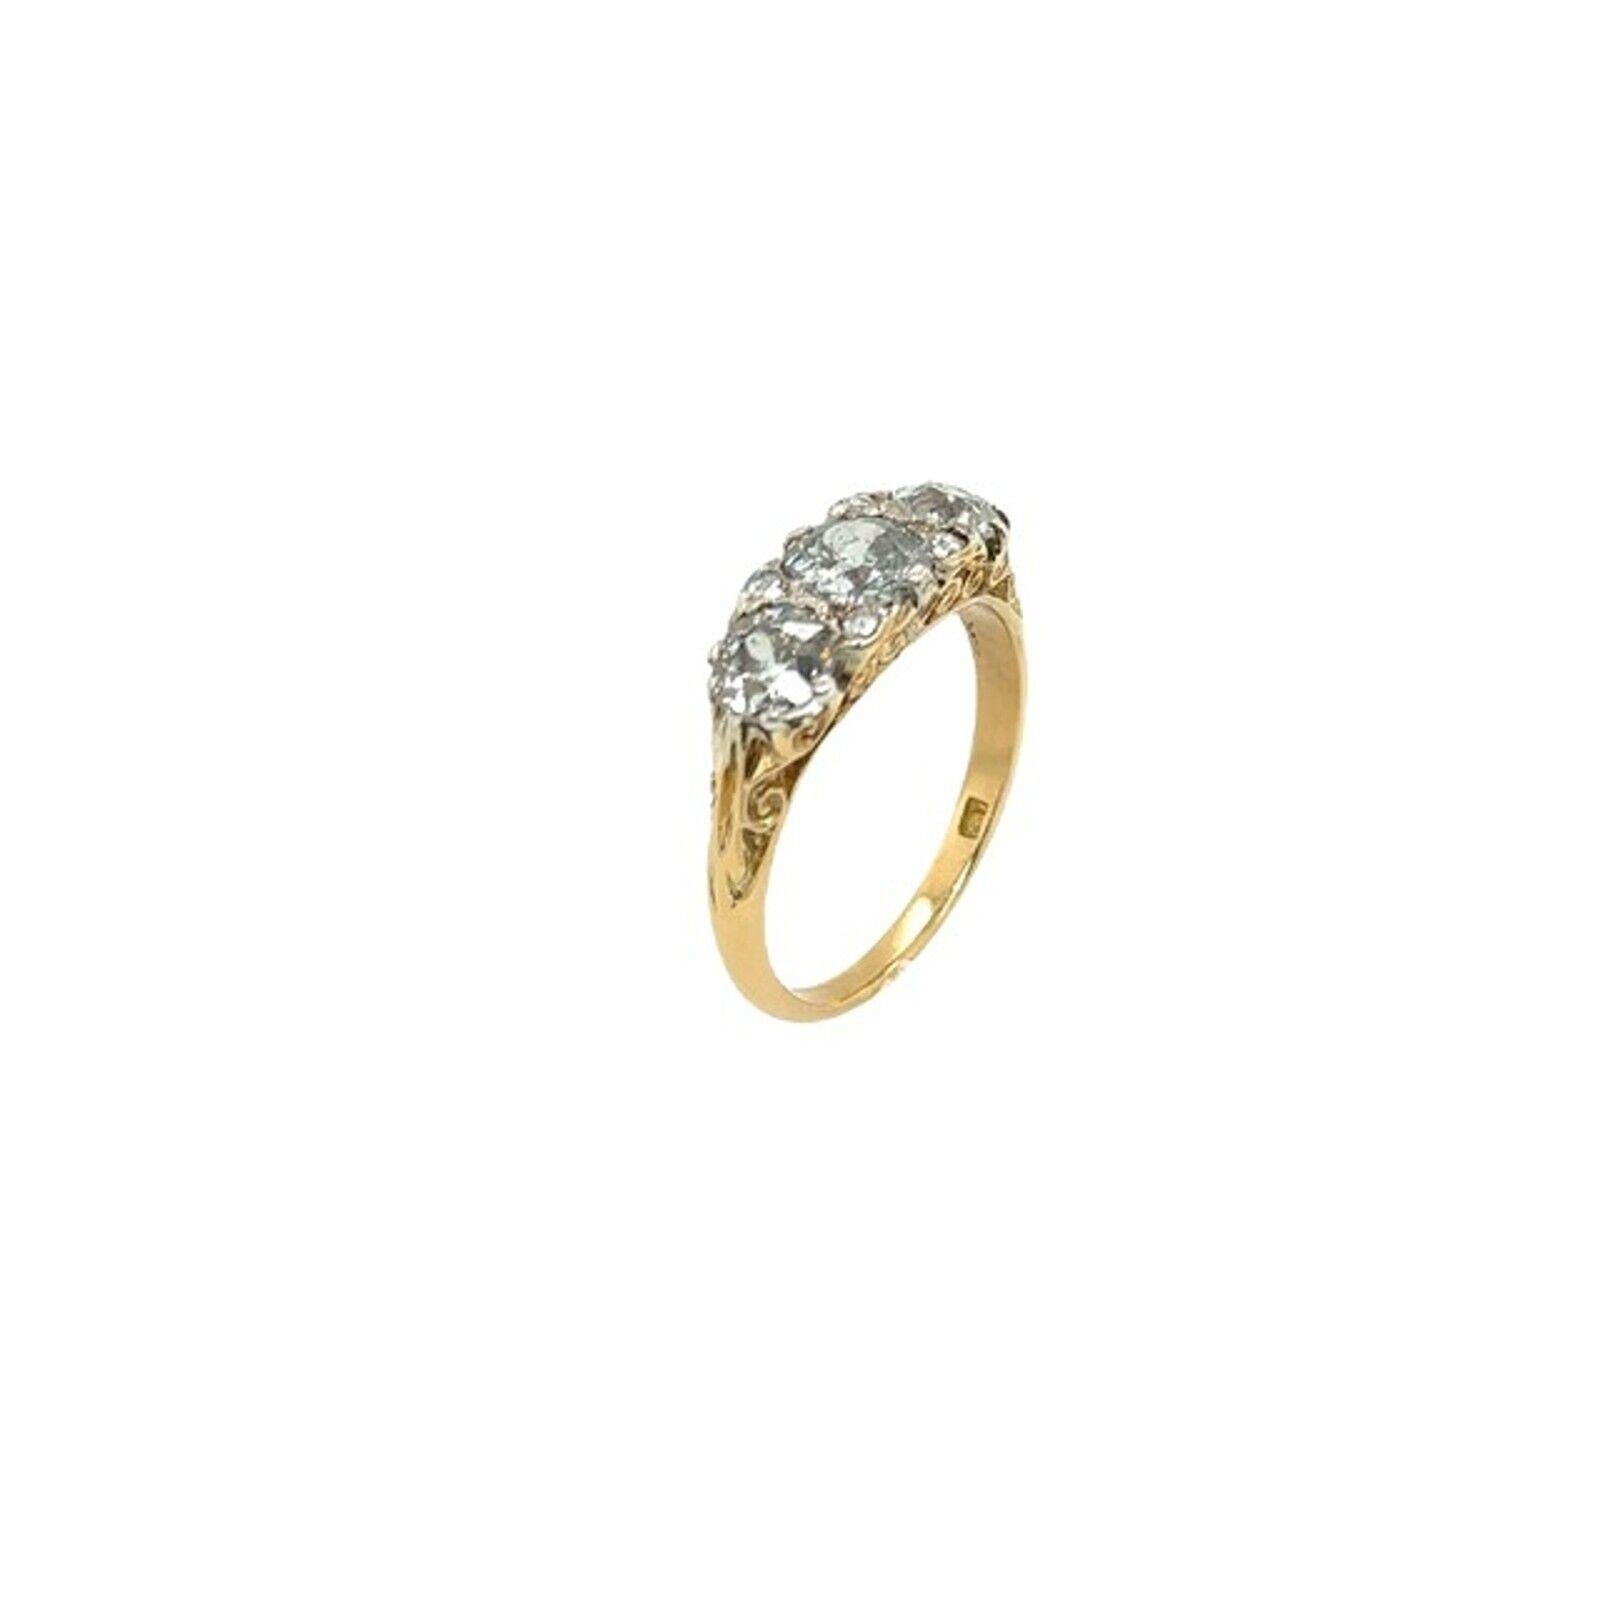 Reflecting timeless essences with this carved half-hoop ring 3-stone Victorian rose cut diamond that symbolizes your past, present, and future, making it the perfect epitome of eternal love. The Diamonds are G/H colour and SI2/3 clarity.

Additional